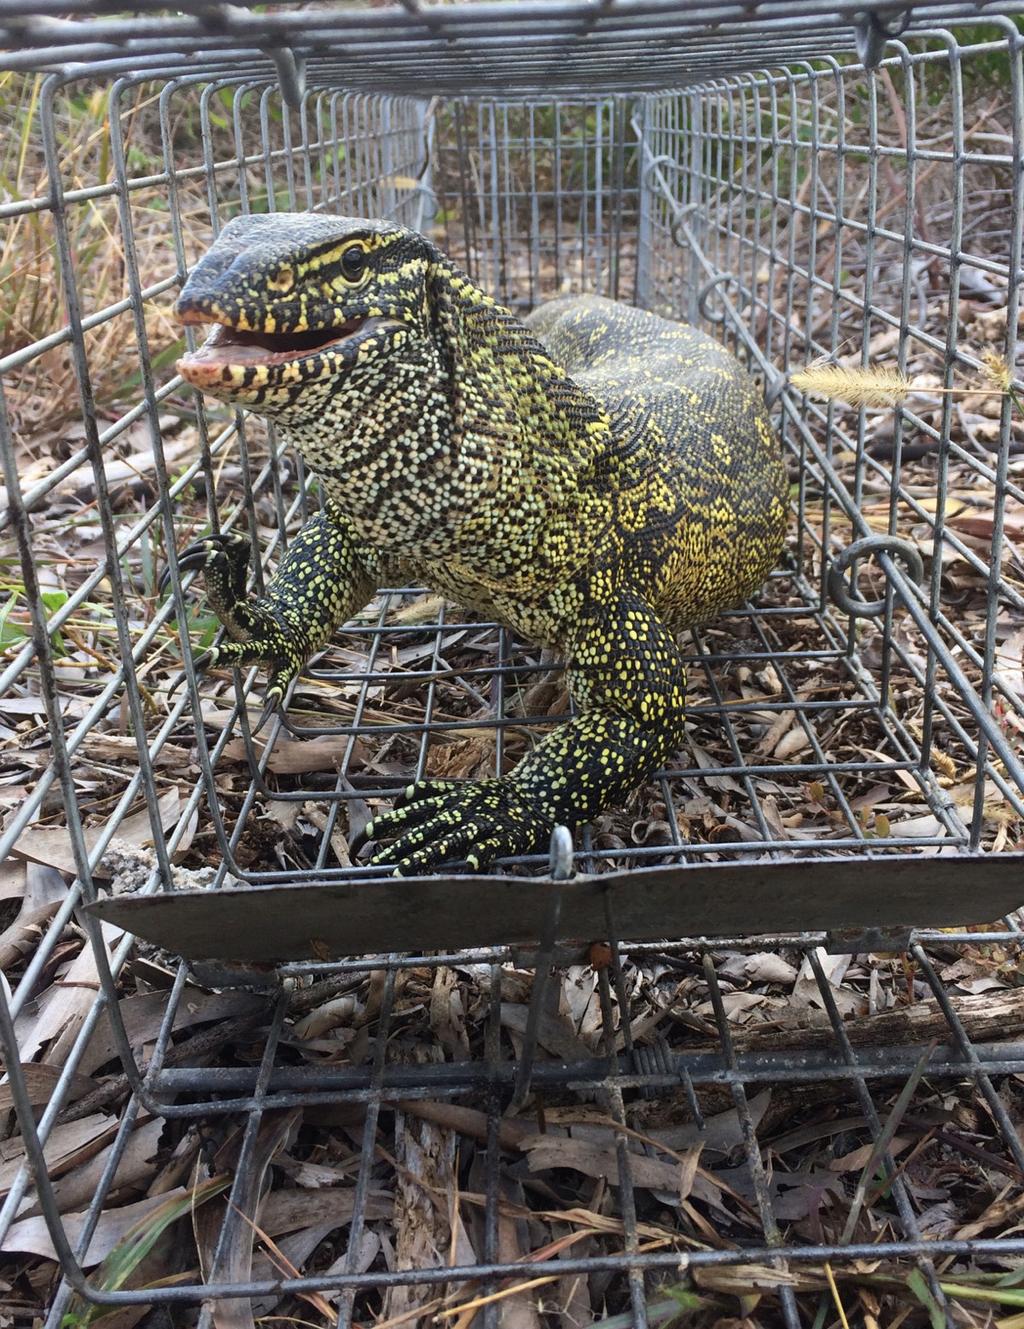 A two-year pursuit of Nile monitor lizards ended after we distributed door hangers in Southwest Ranches, Broward County.